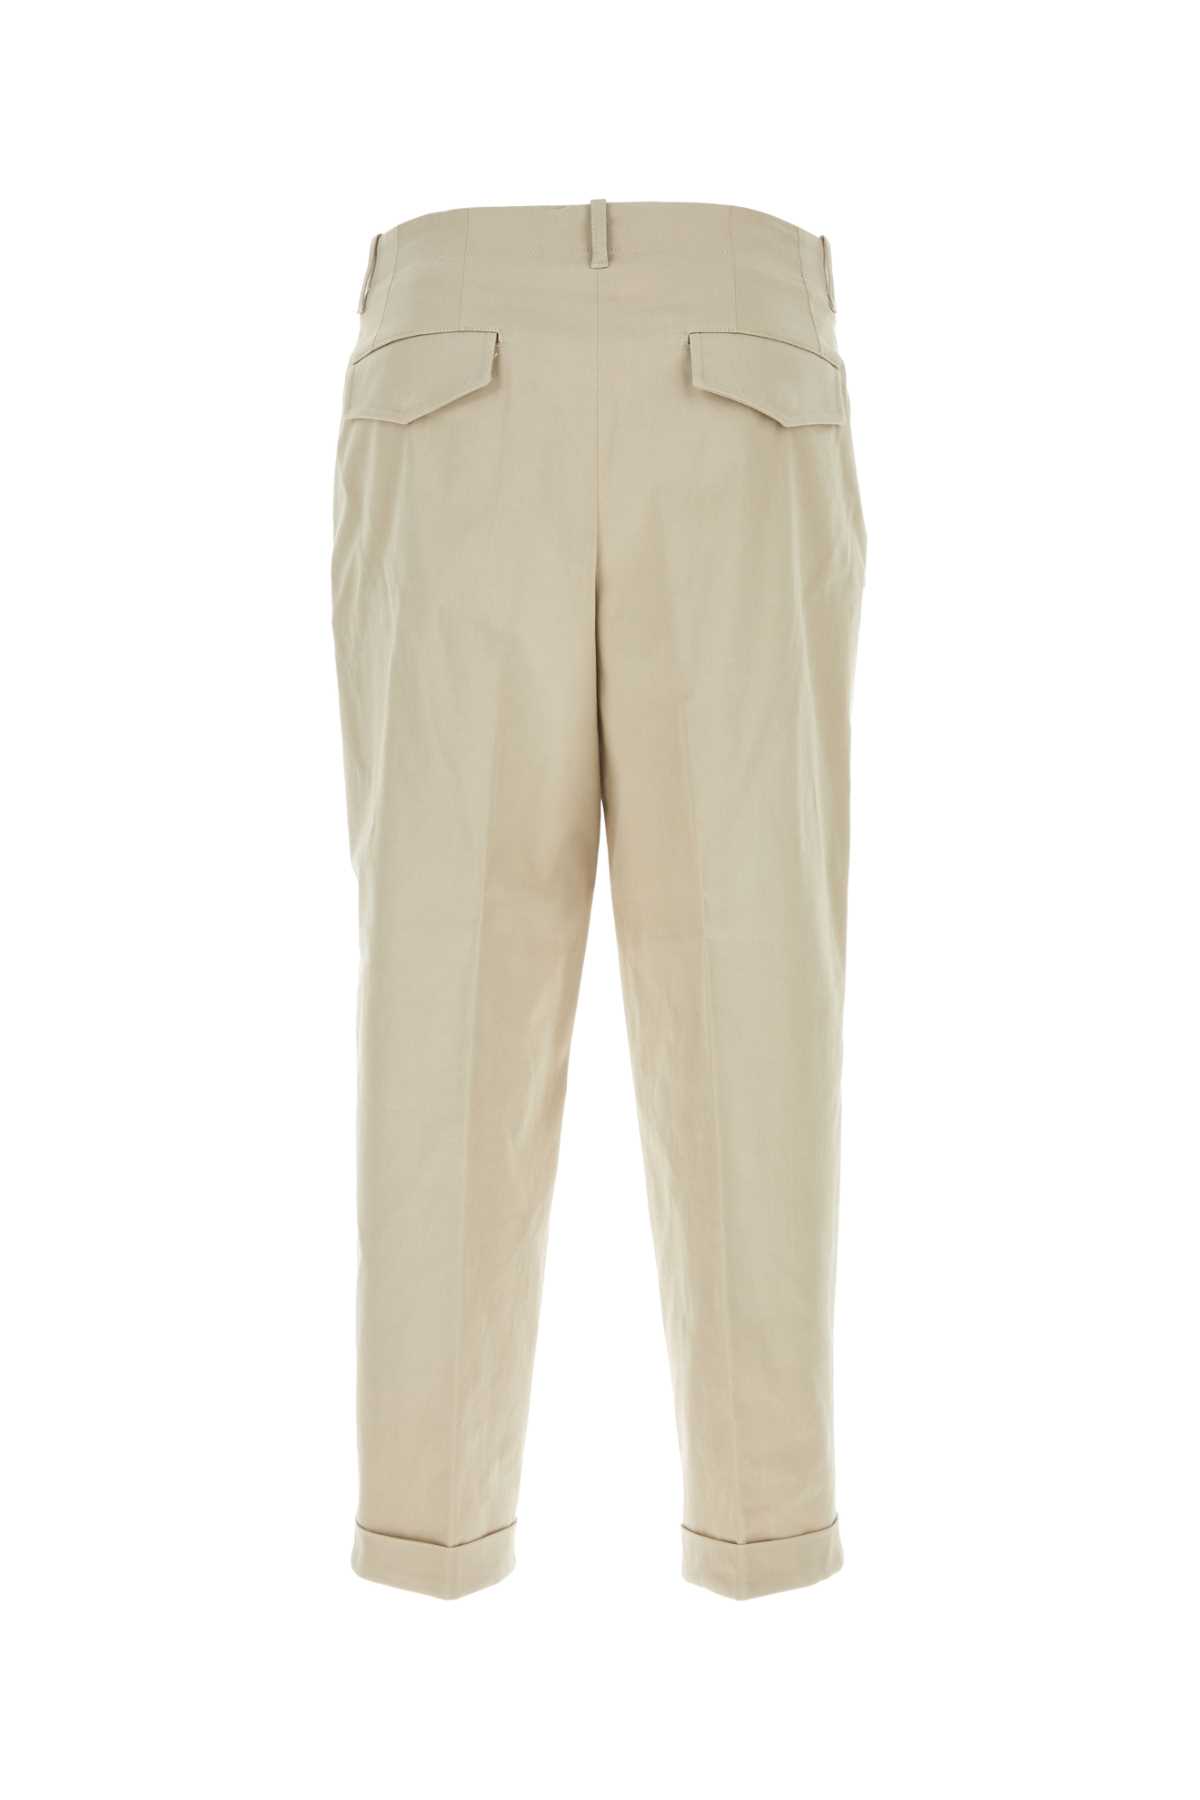 Etro Sand Stretch Cotton Pant In Beige